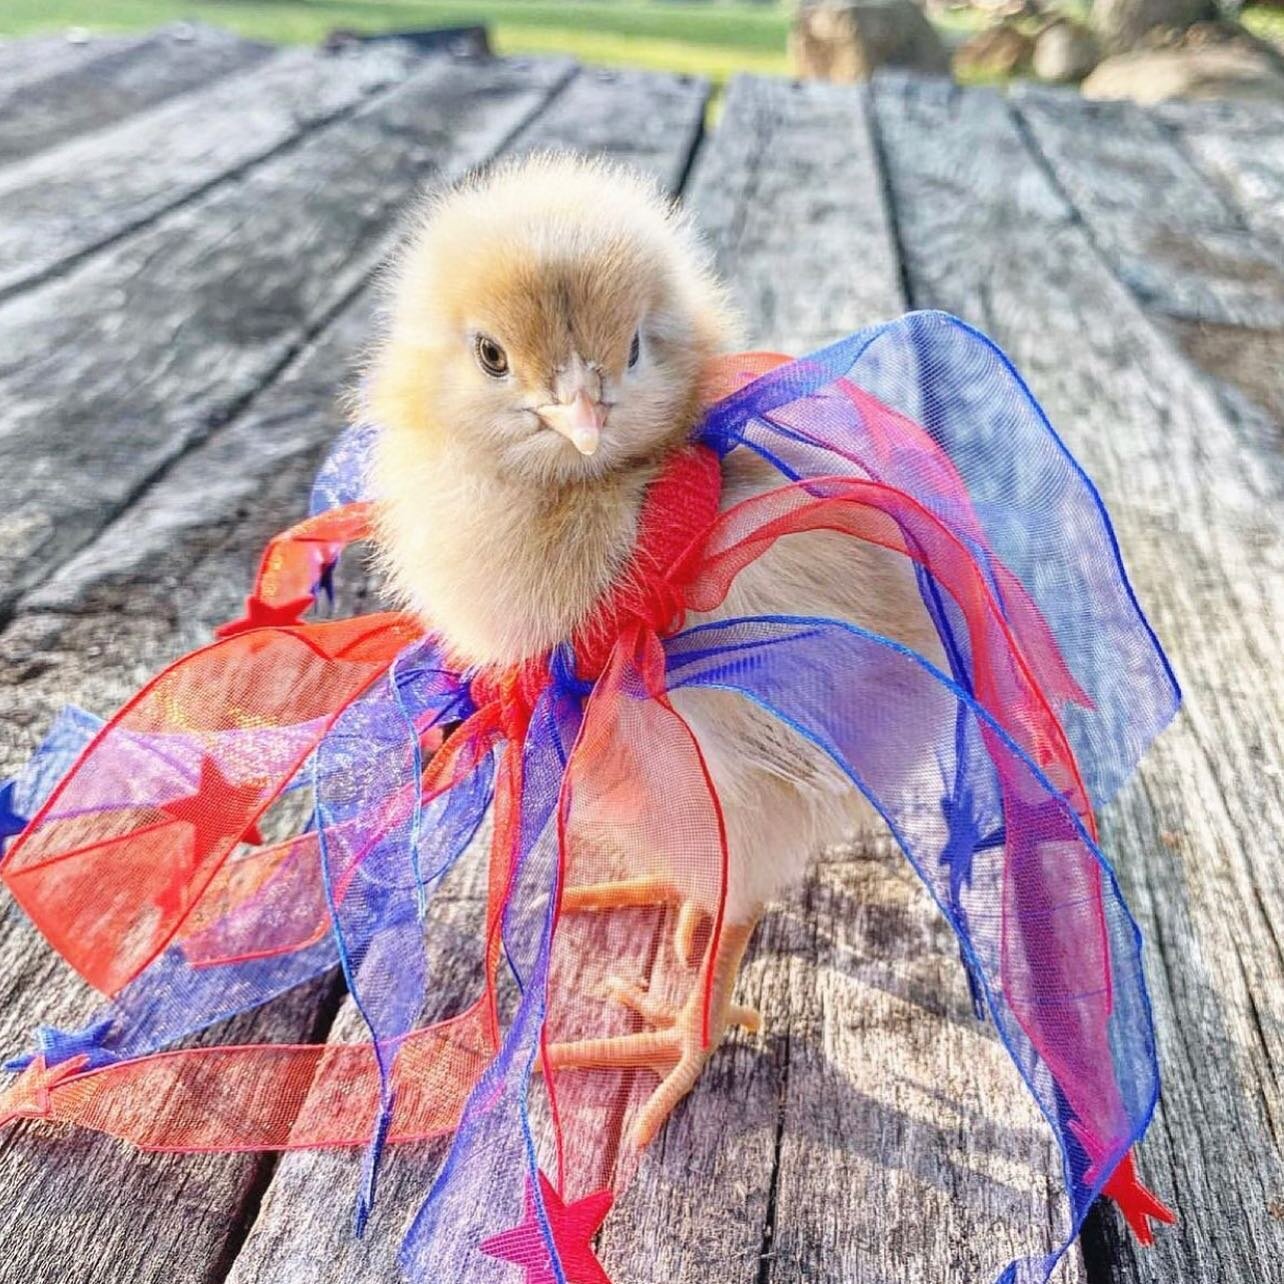 We were seriously egg-cited to see so many patriotic chicks enjoying the 4th of July! How is your flock celebrating? 🇺🇸

📸 credit: tutu chick @bobbijeanratliff ; bunting flag chick: @carolinekomarsteiner